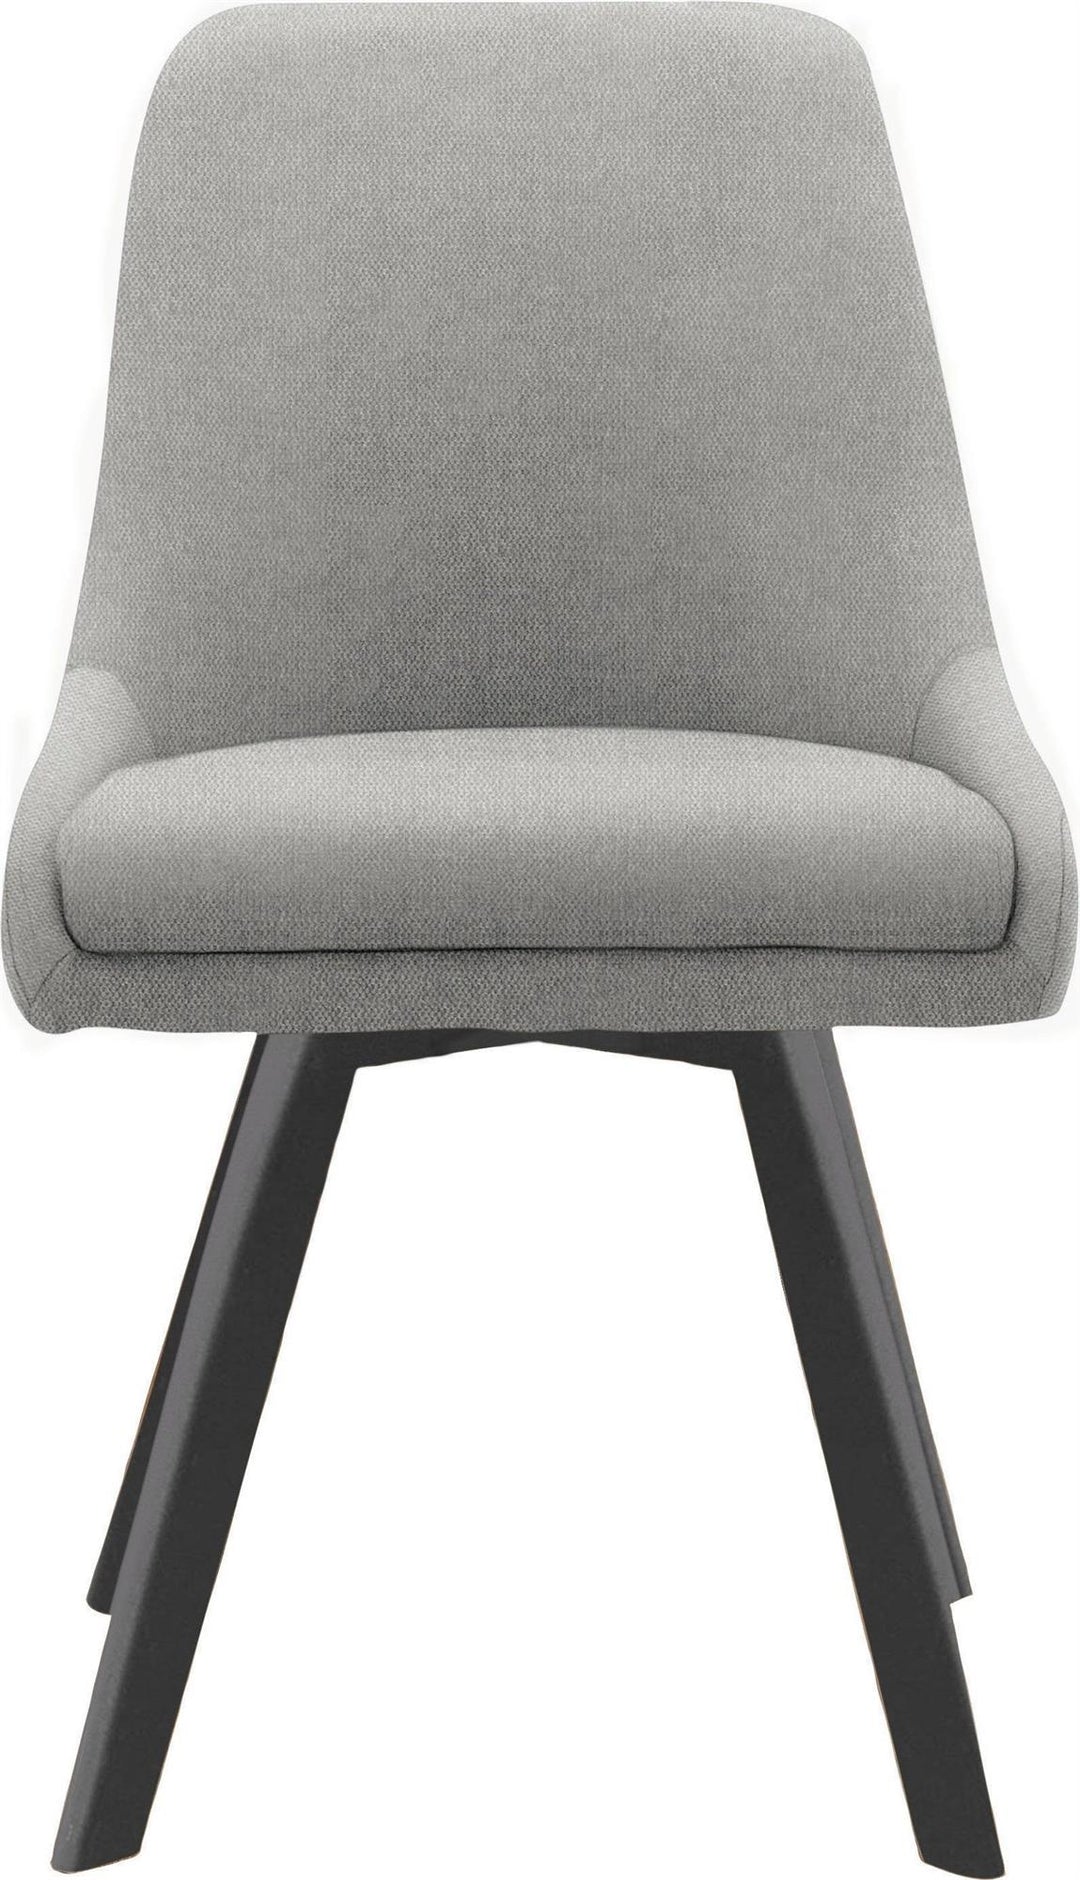 Thora Dining Chair with Black Metal Legs, Set of 2 - Gray - Set of 2